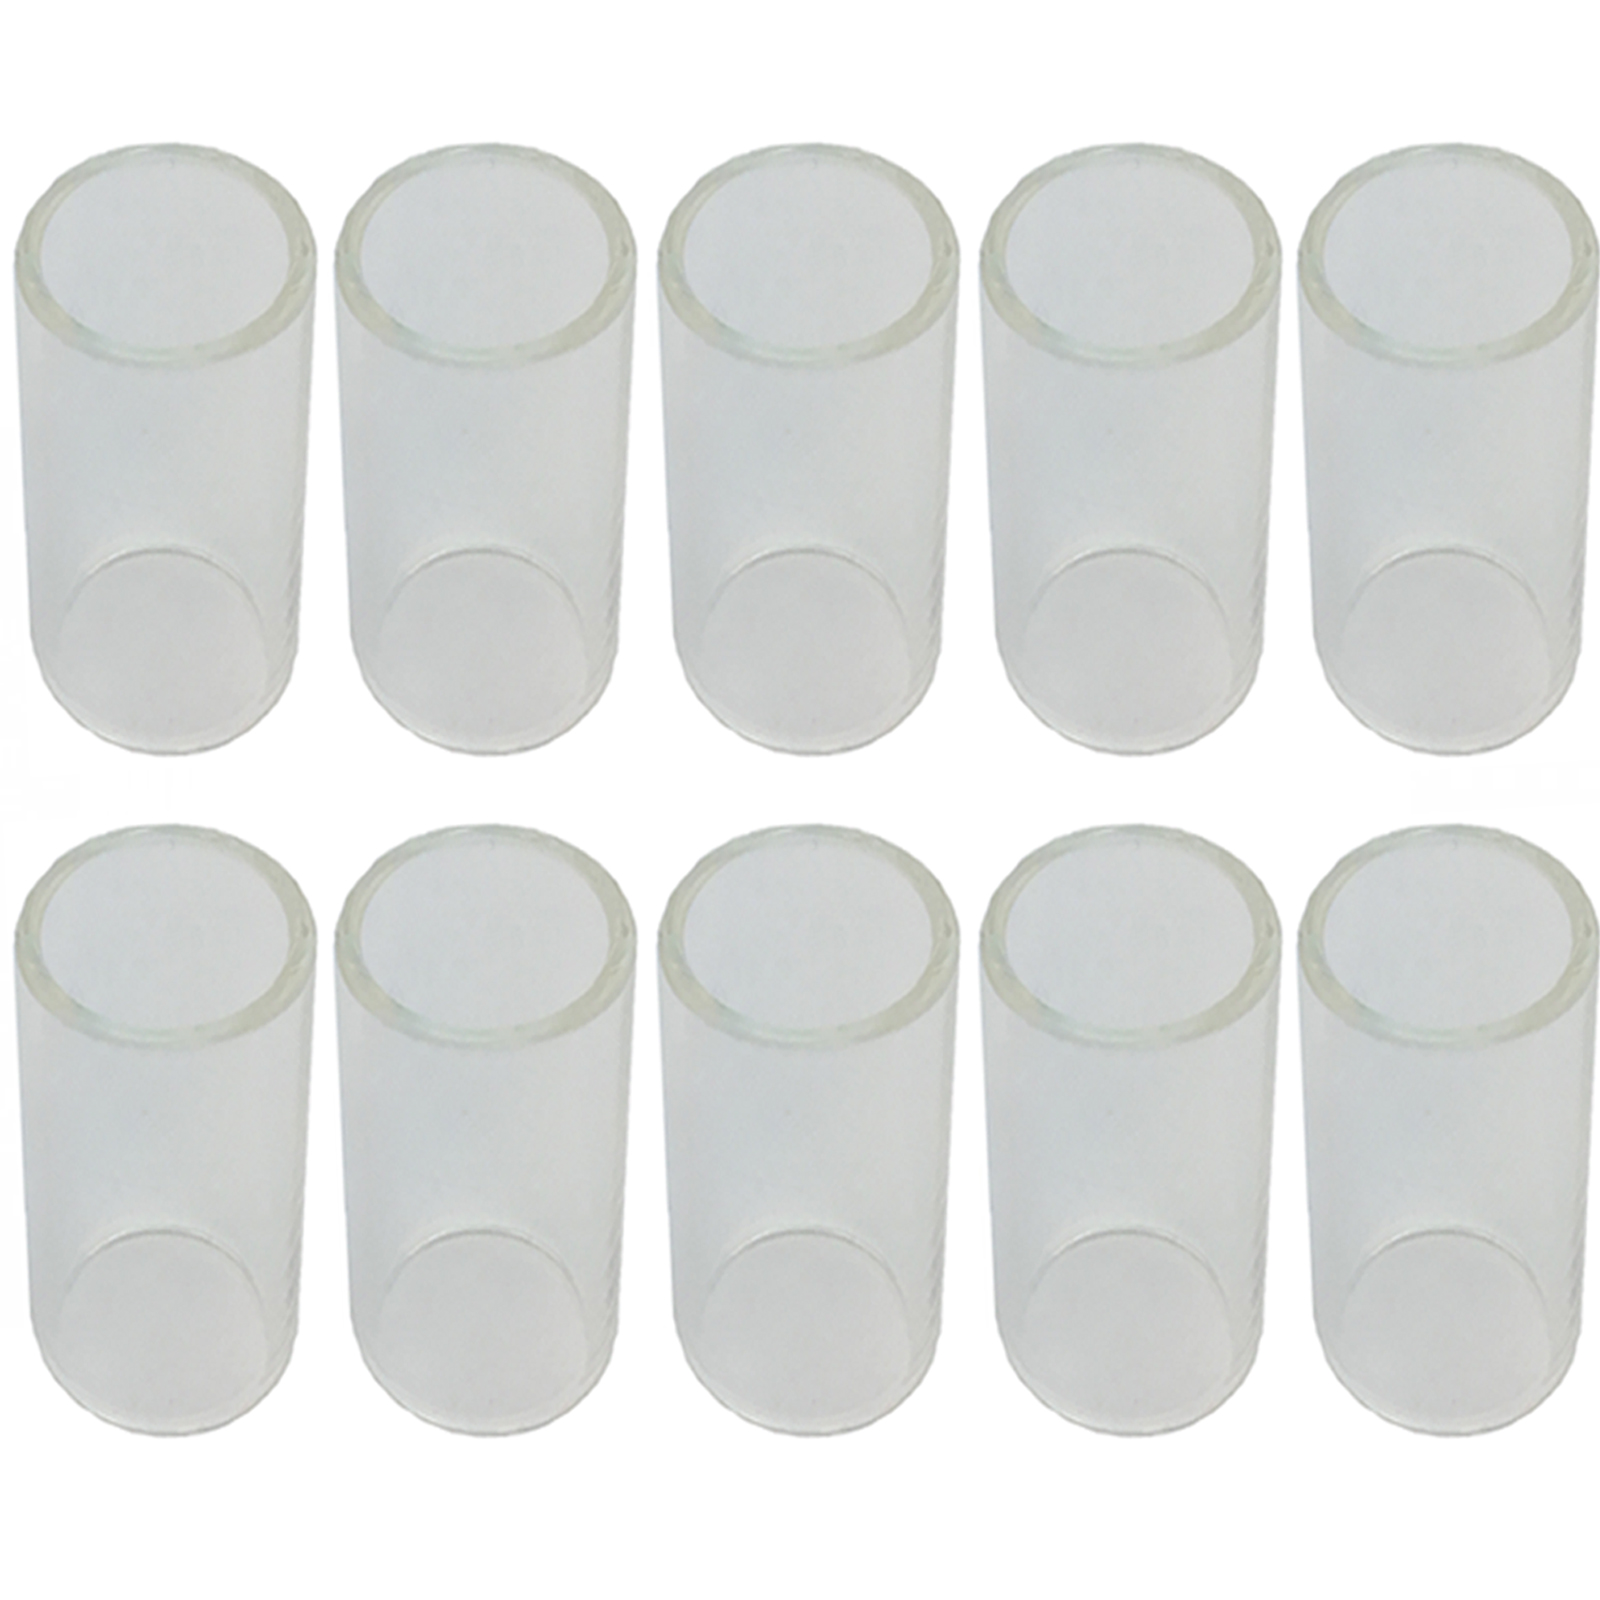 Pyrex Glass TIG cups 54N19 style - 10 cup value pack - WP17/18/26